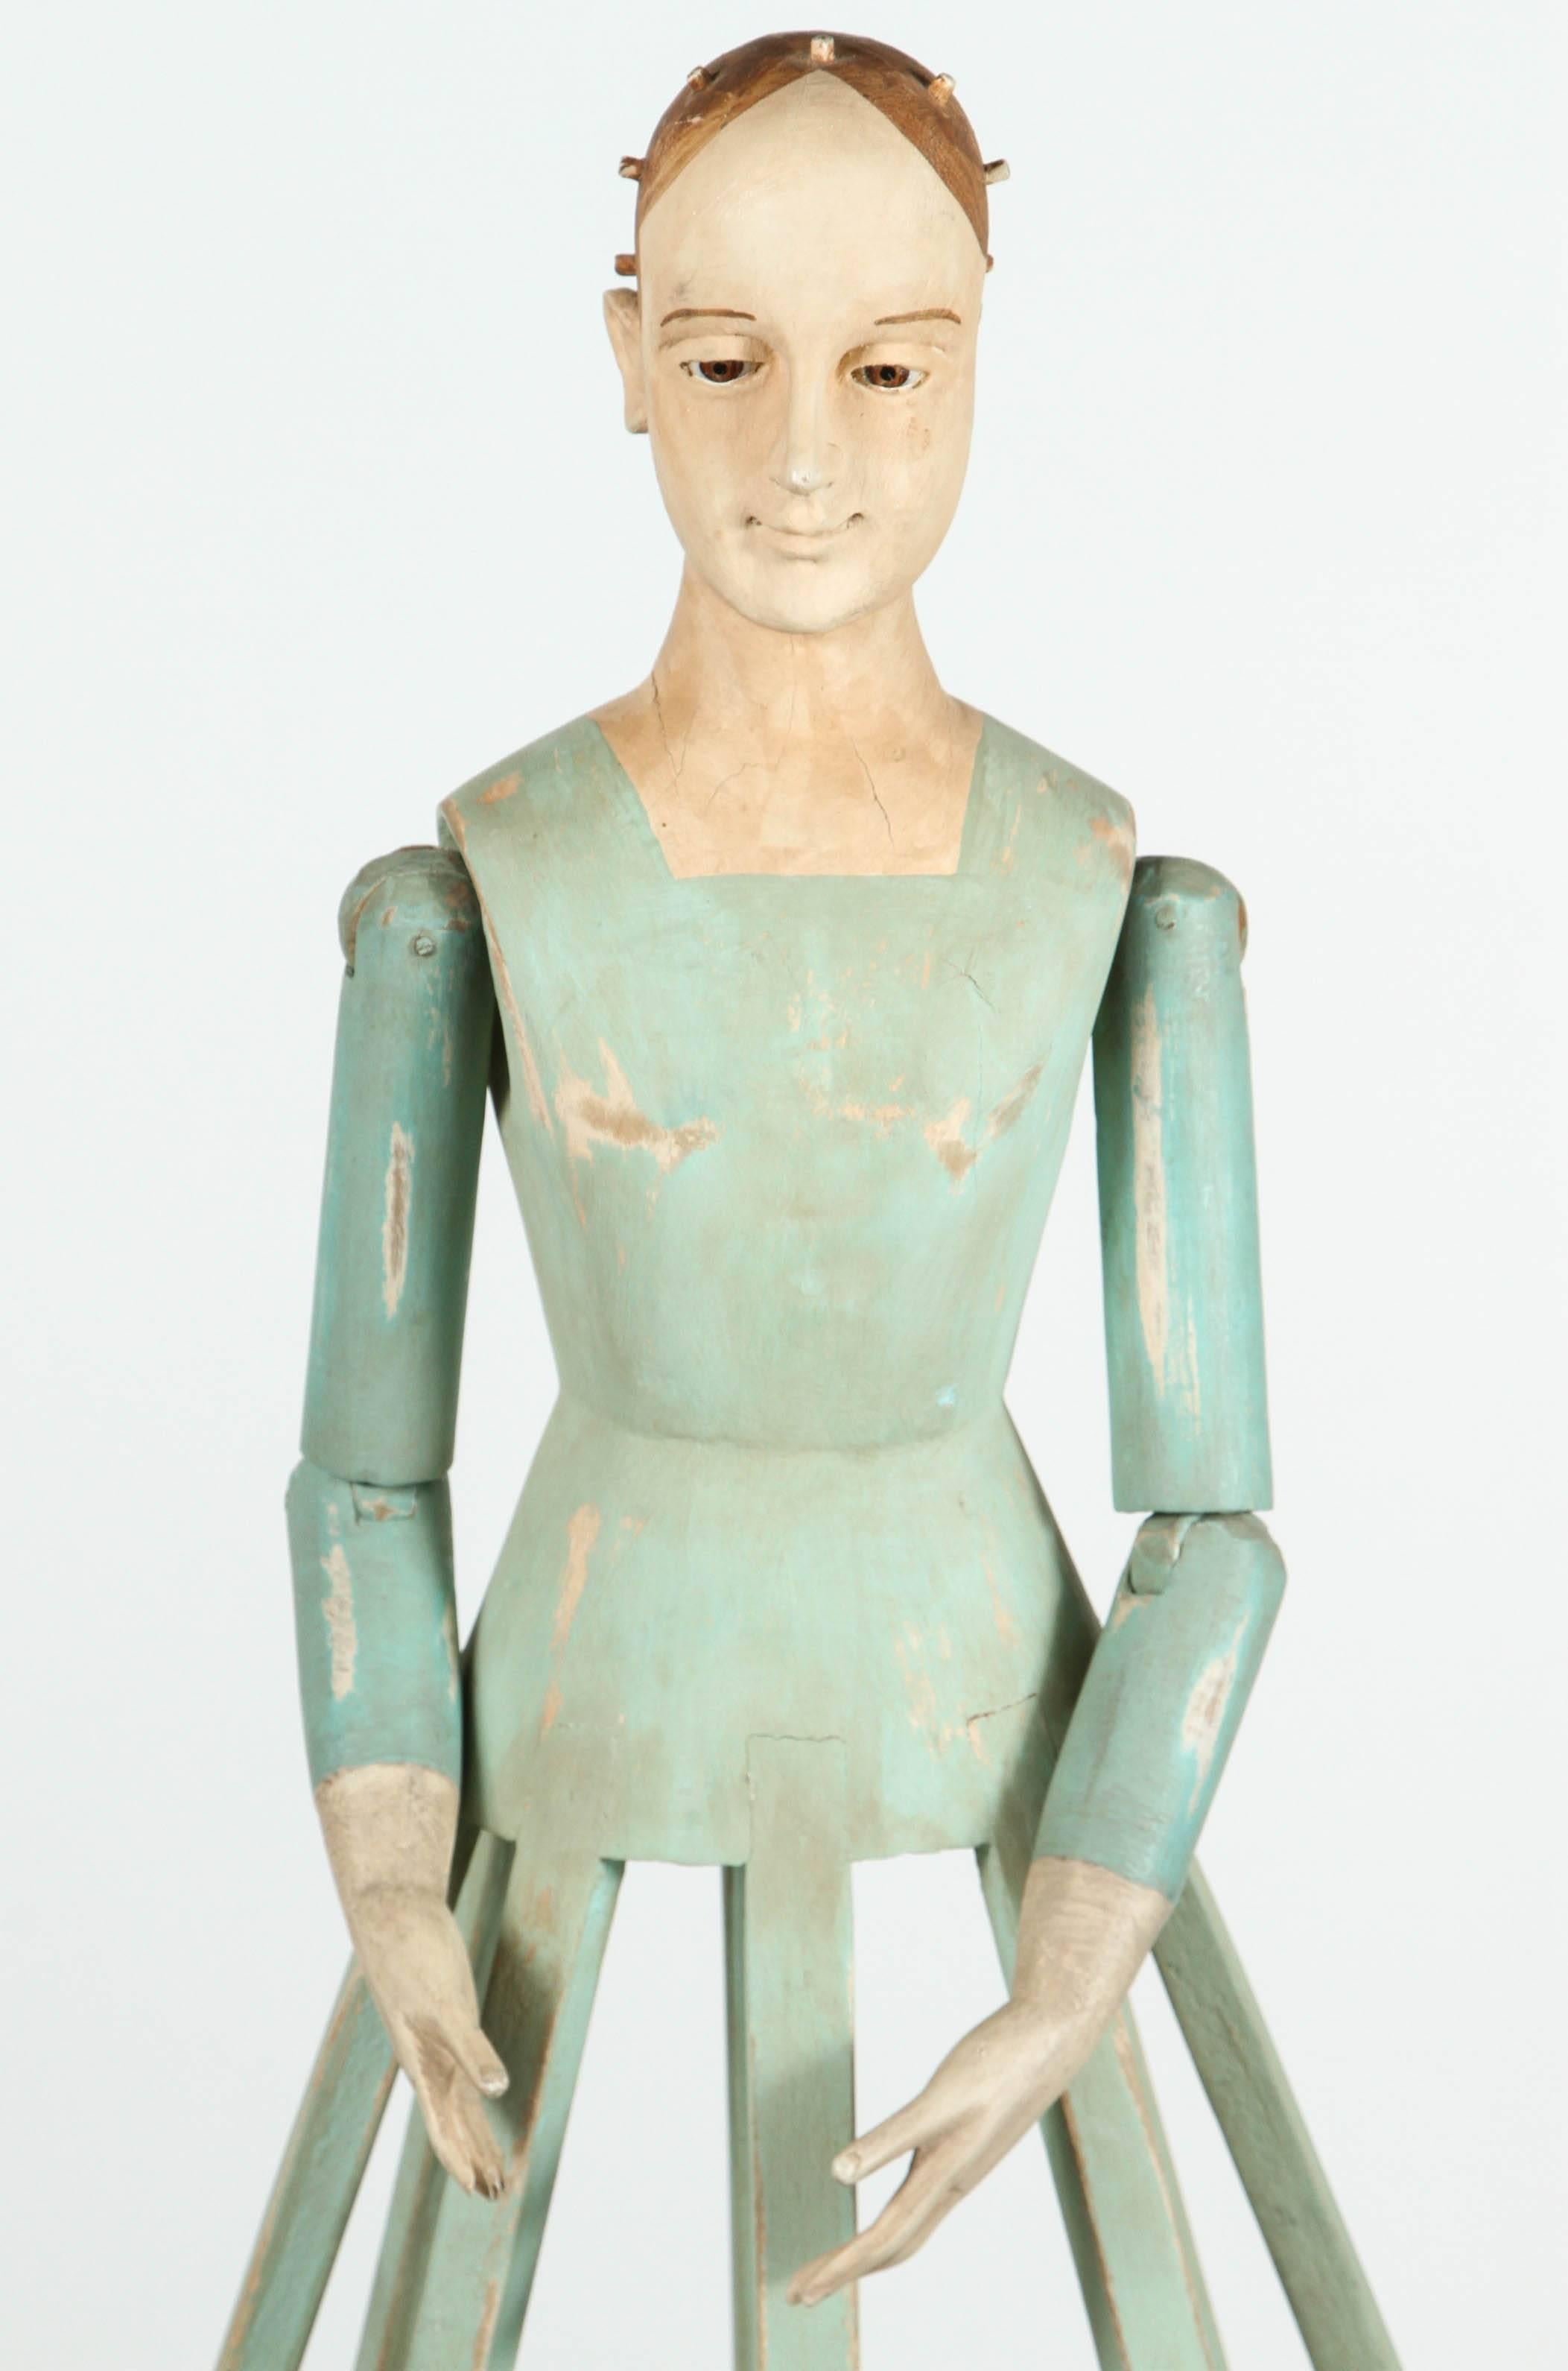 Vintage handcrafted Santo Mannequin.

Wooden turquoise dress.
Three angels on bottom base.
Wooden platform.

Mid-19th century bastidor (cage) santo with inset glass eyes, articulated arms jointed at the elbow and shoulder, together with the